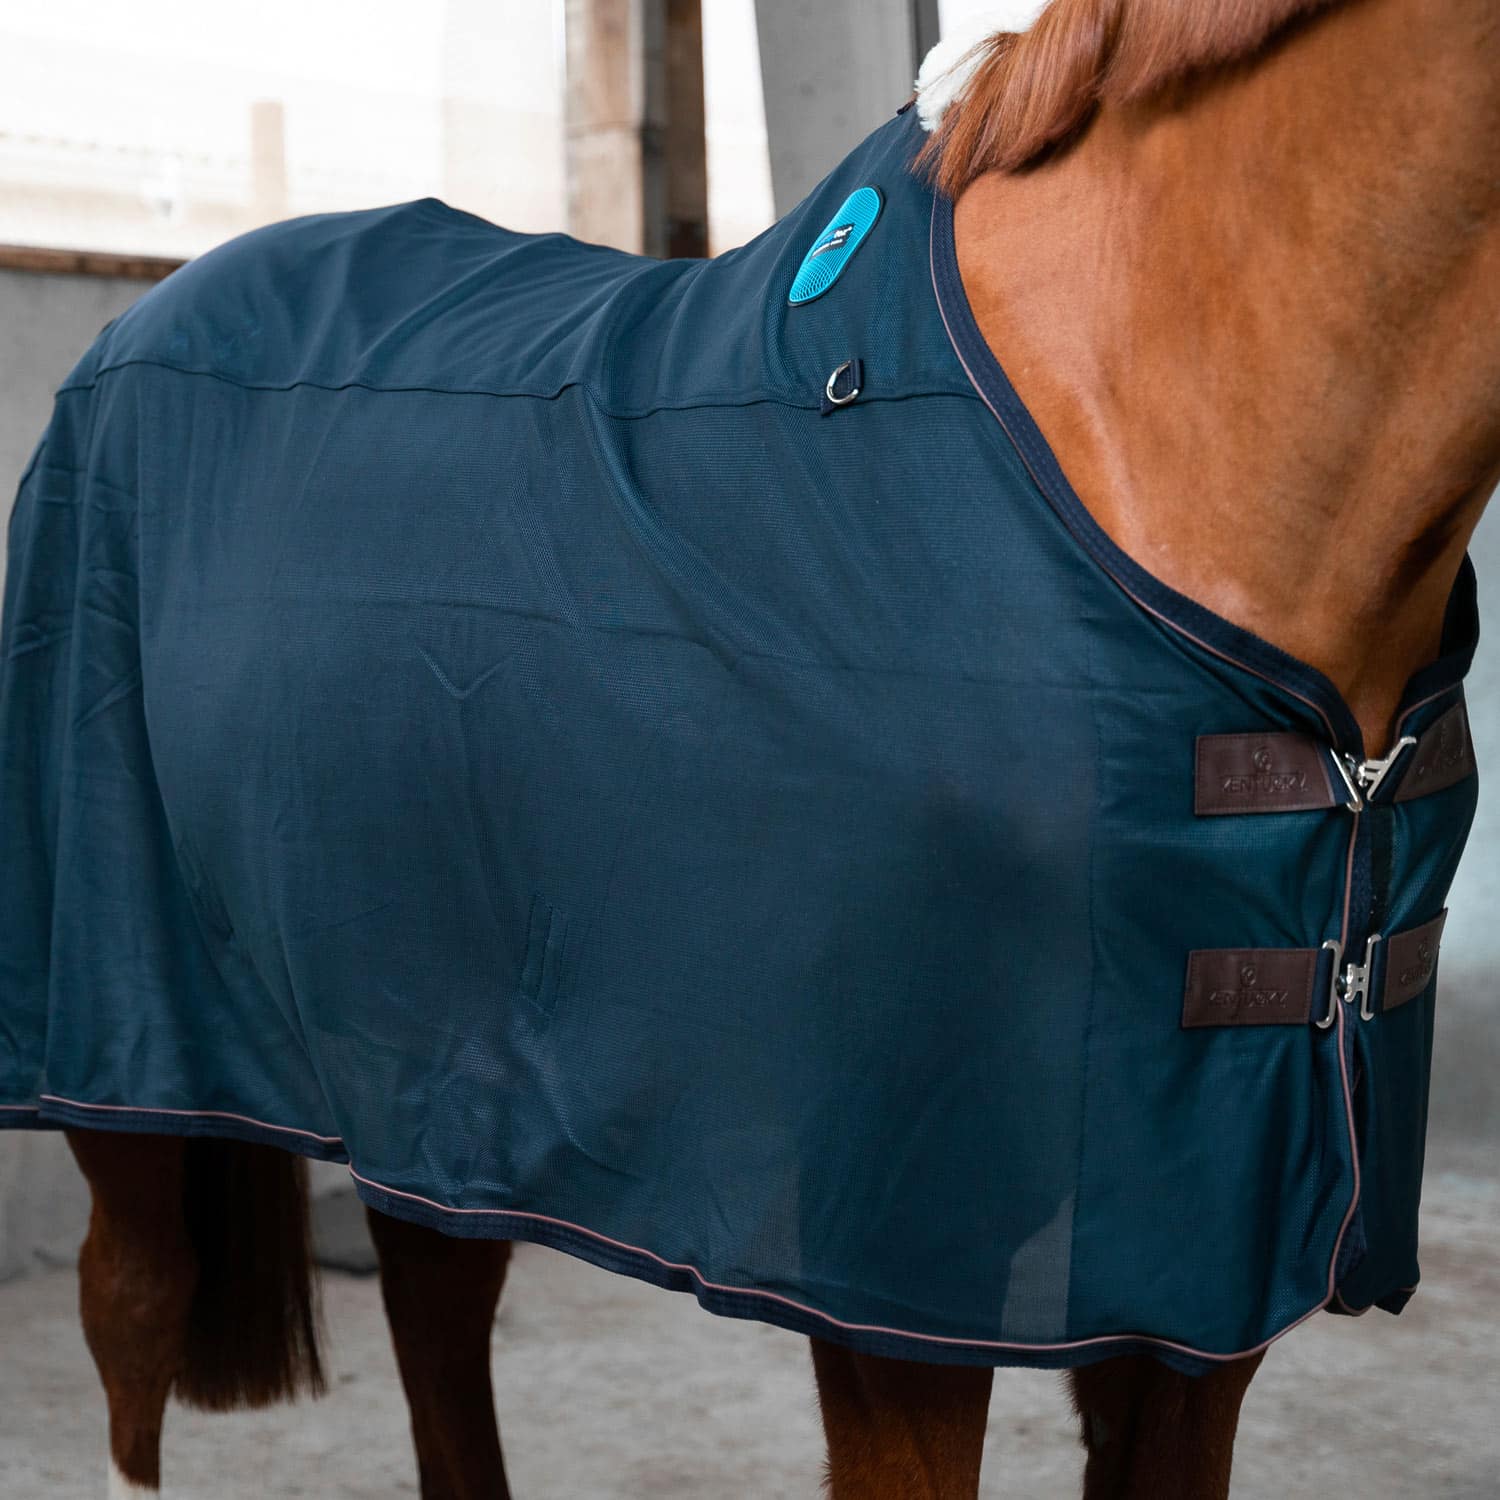 Kentucky Horsewear - Couverture Magnétique Recuptex Marine - Myver Sellerie